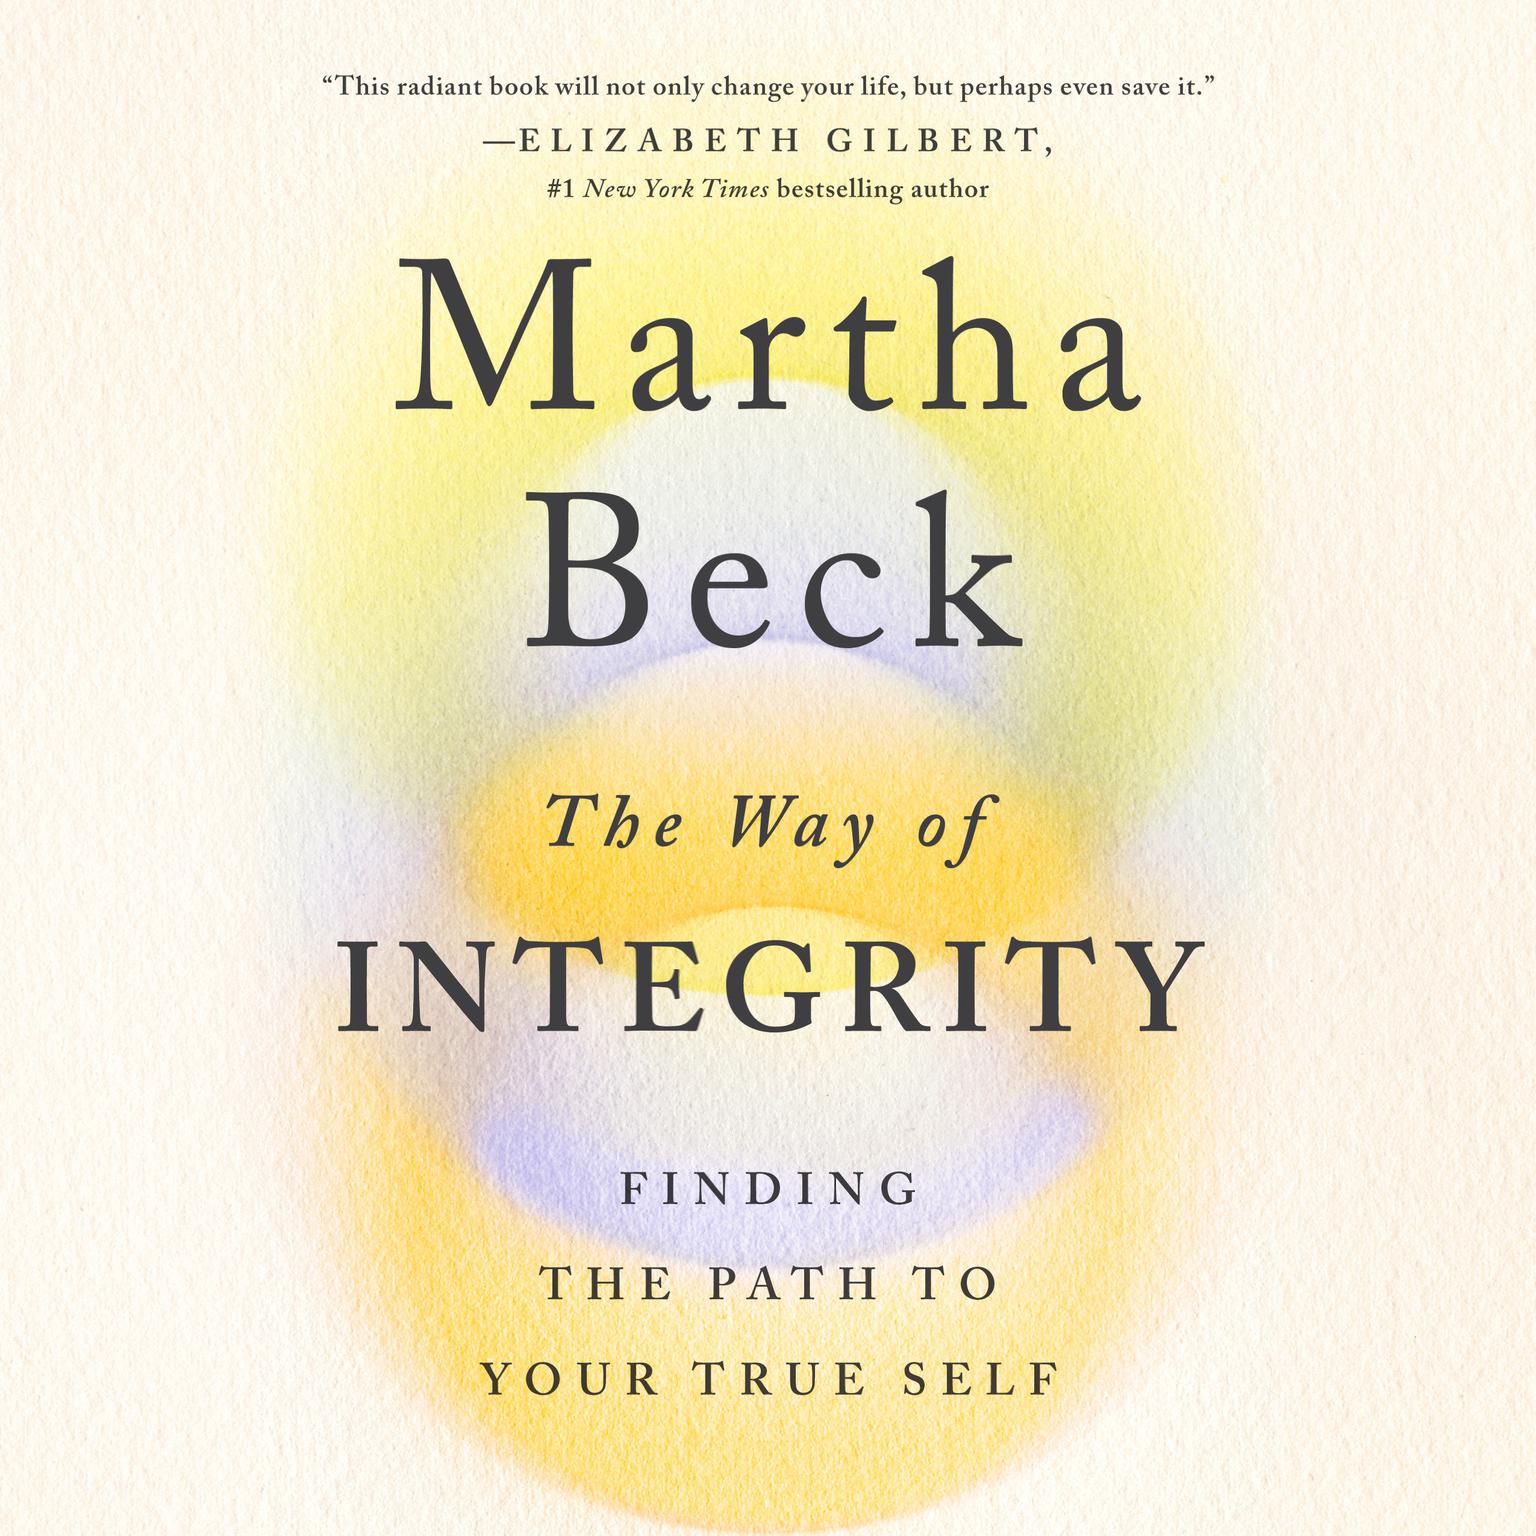 The Way of Integrity: Finding the Path to Your True Self (Oprahs Book Club) Audiobook, by Martha Beck